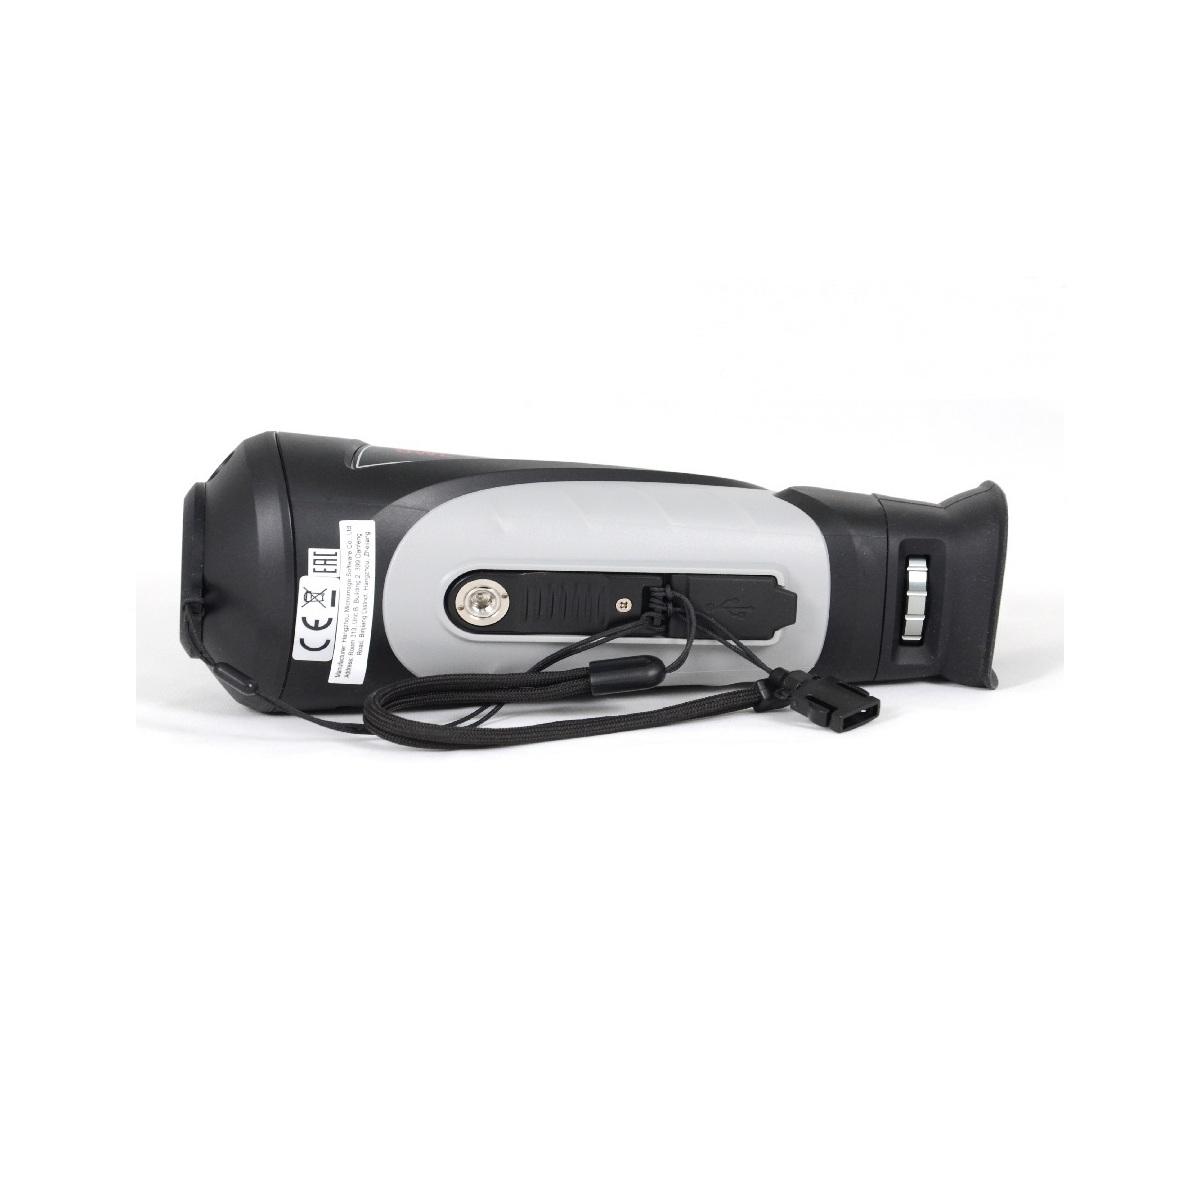 HIKMICRO OWL OH25 Monocolo THERMAL Dig.Zoom 1.7/13.6x Telemetro 16G Wifi 1024×780 Oled Lens 25mm (A)